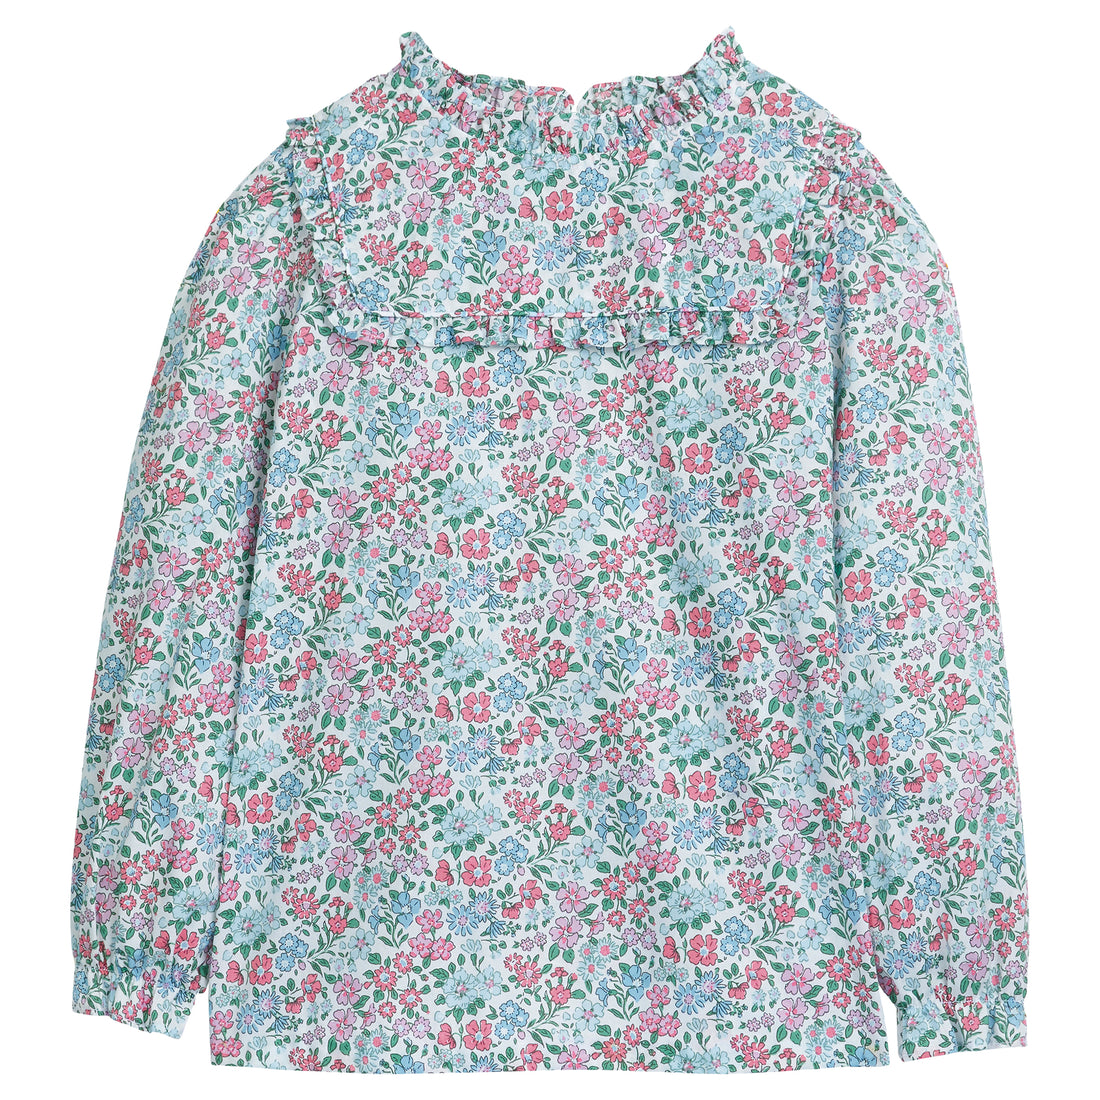 Little English classic childrens clothing girls long sleeve pink and blue floral blouse with ruffled collar